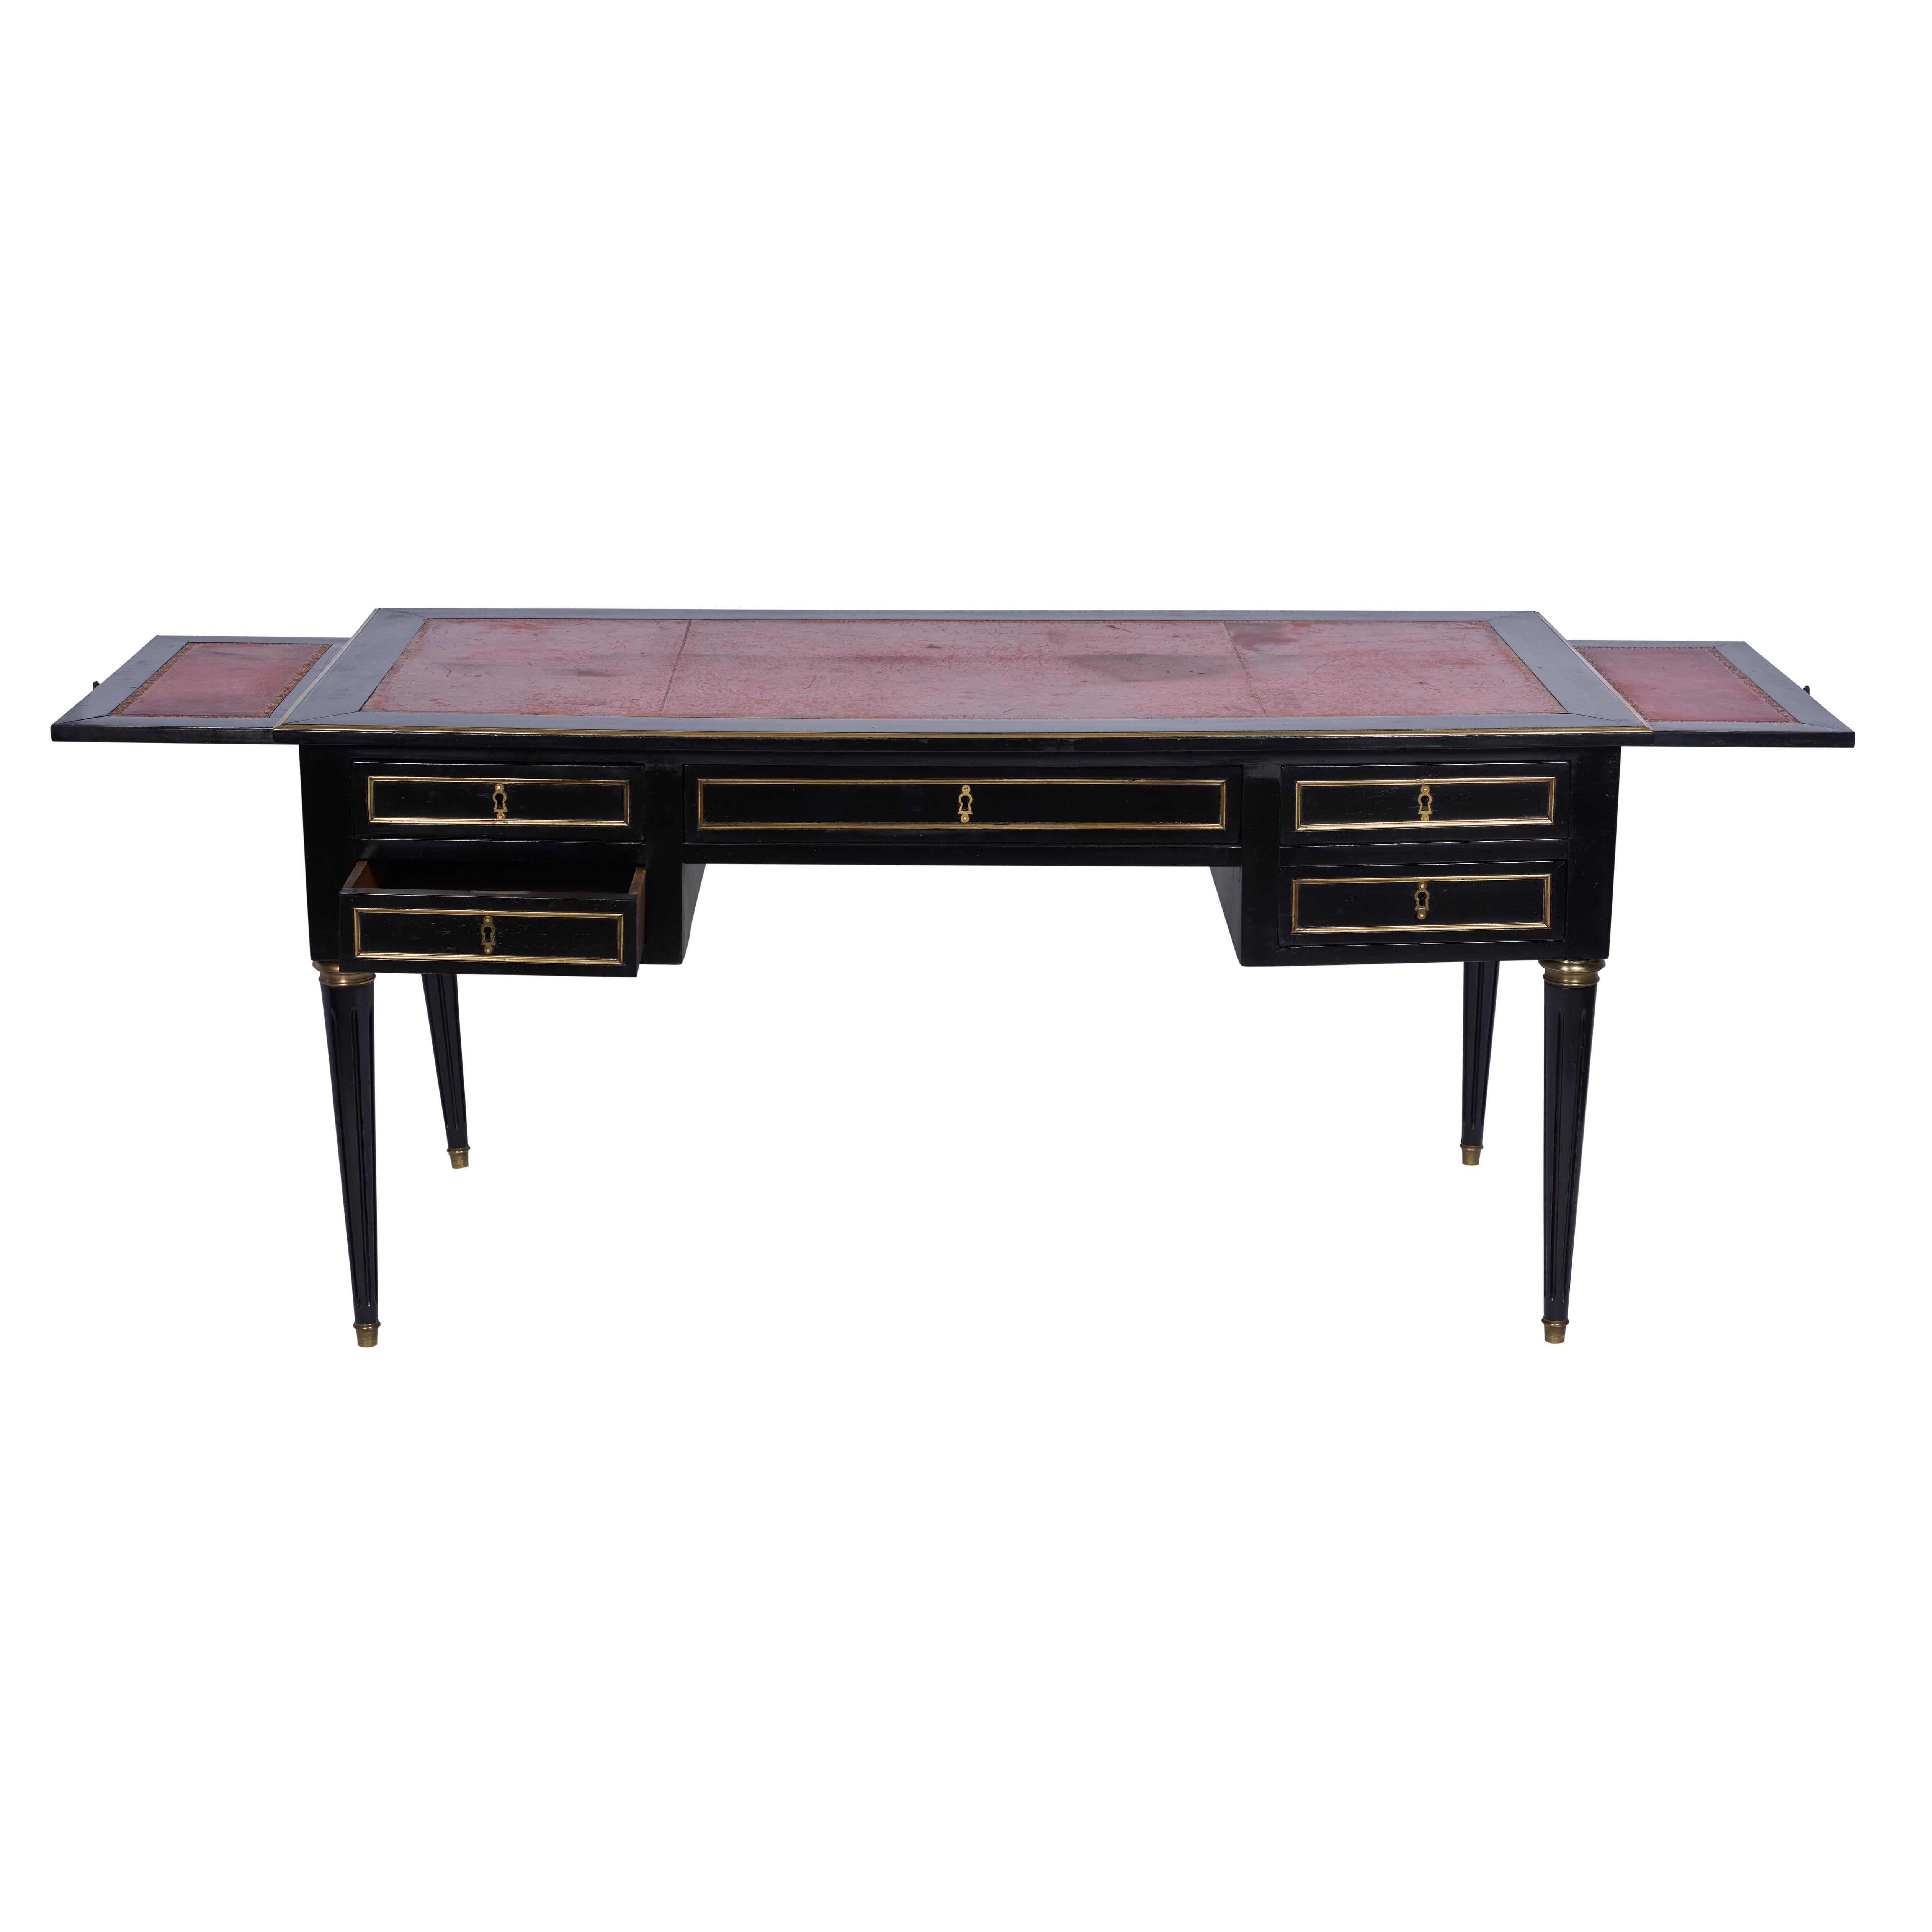 This black ebonized directoire style desk includes brass detailing, red leather and original keys. France, circa 1920-1930.

Since Schumacher was founded in 1889, our family-owned company has been synonymous with style, taste, and innovation. A